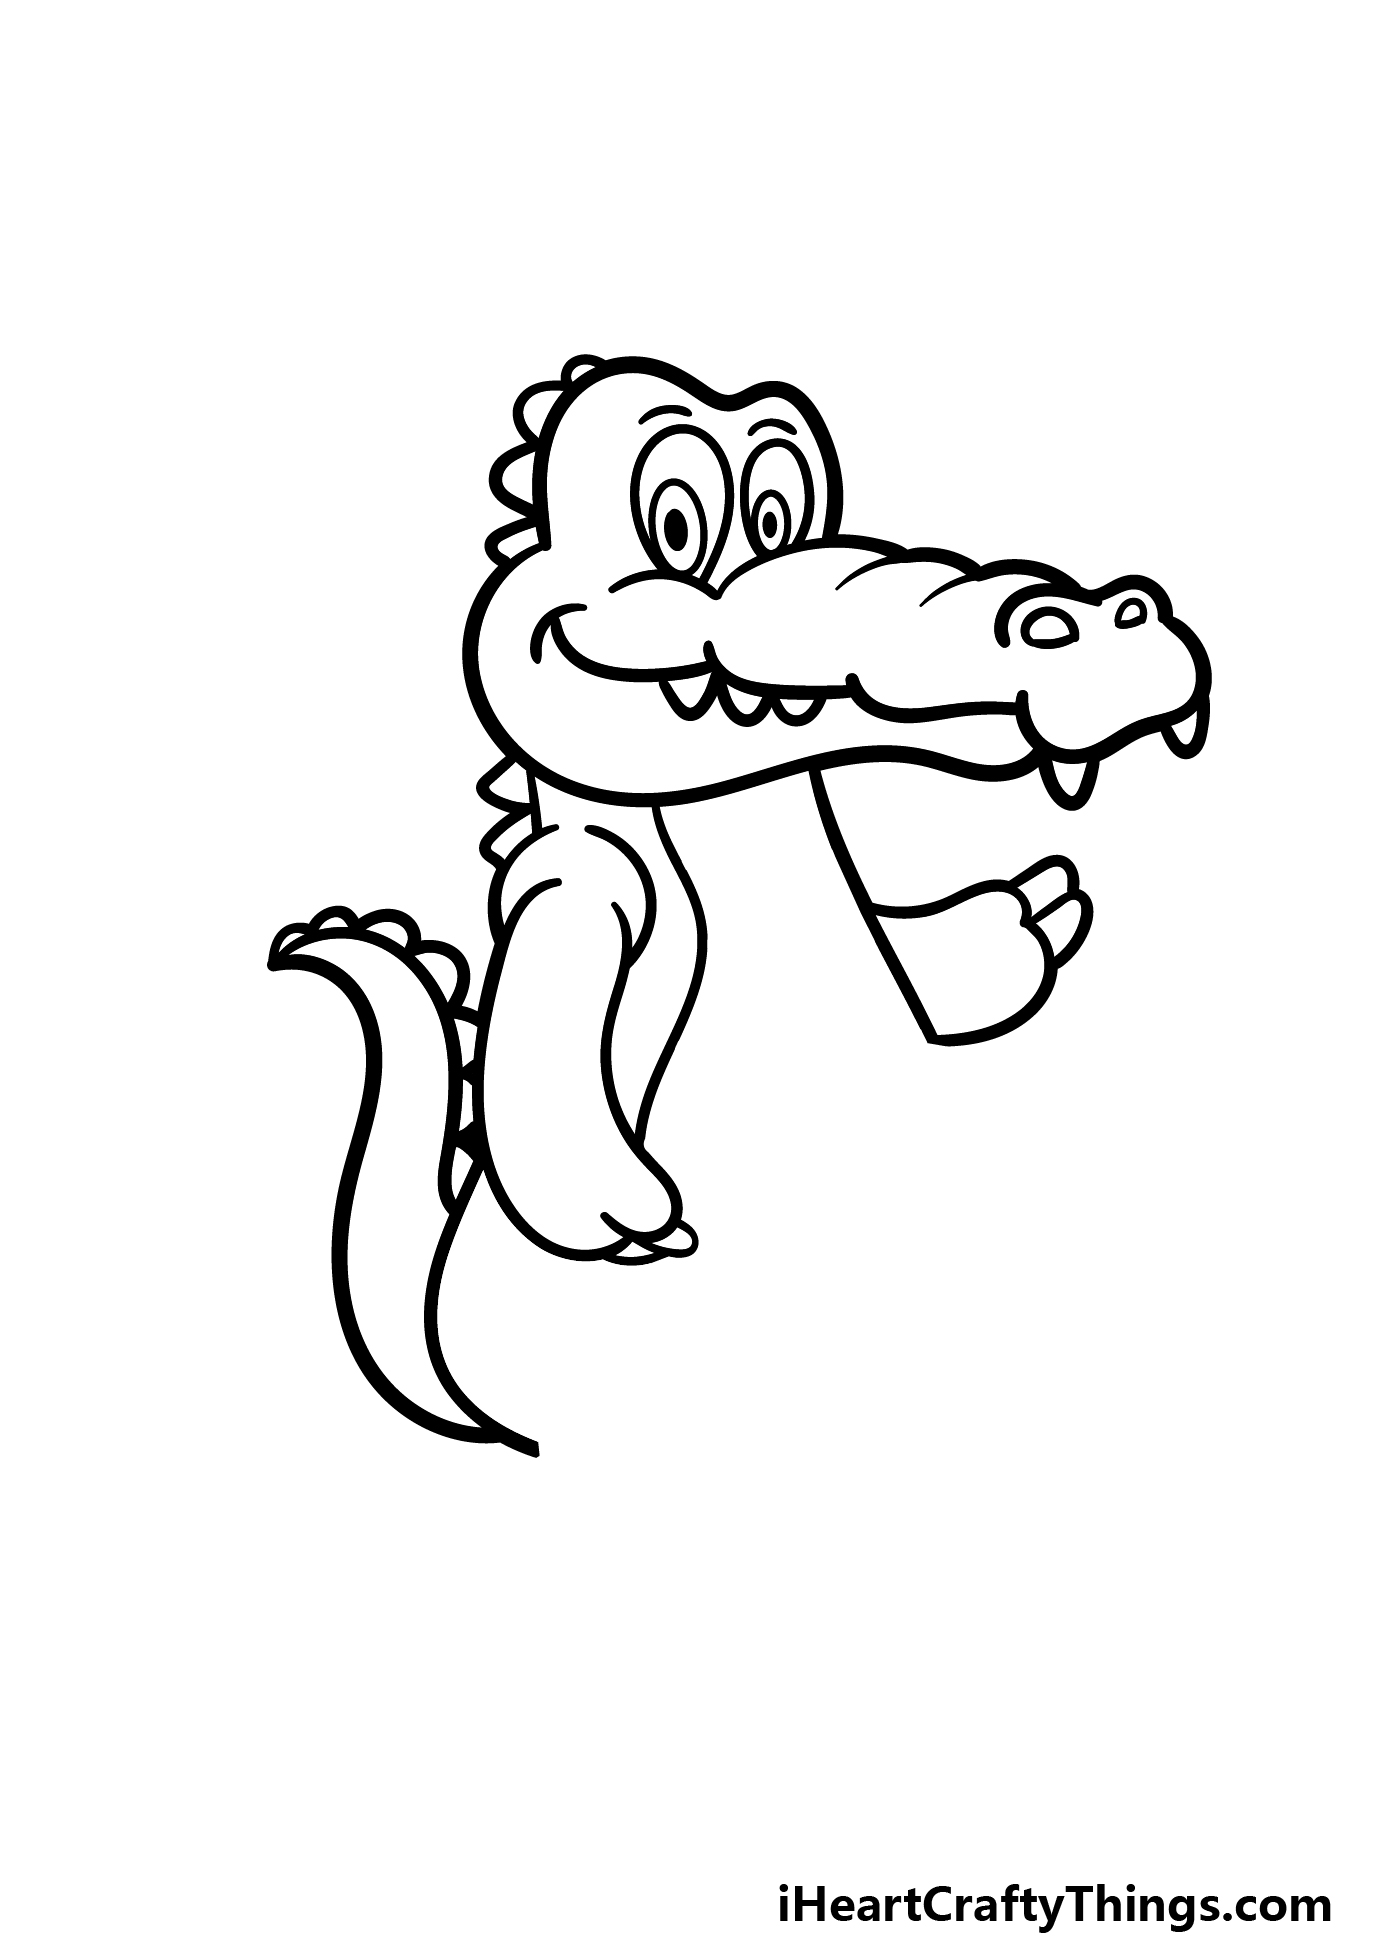 How to draw a cartoon alligator â a step by step guide â i heart crafty things